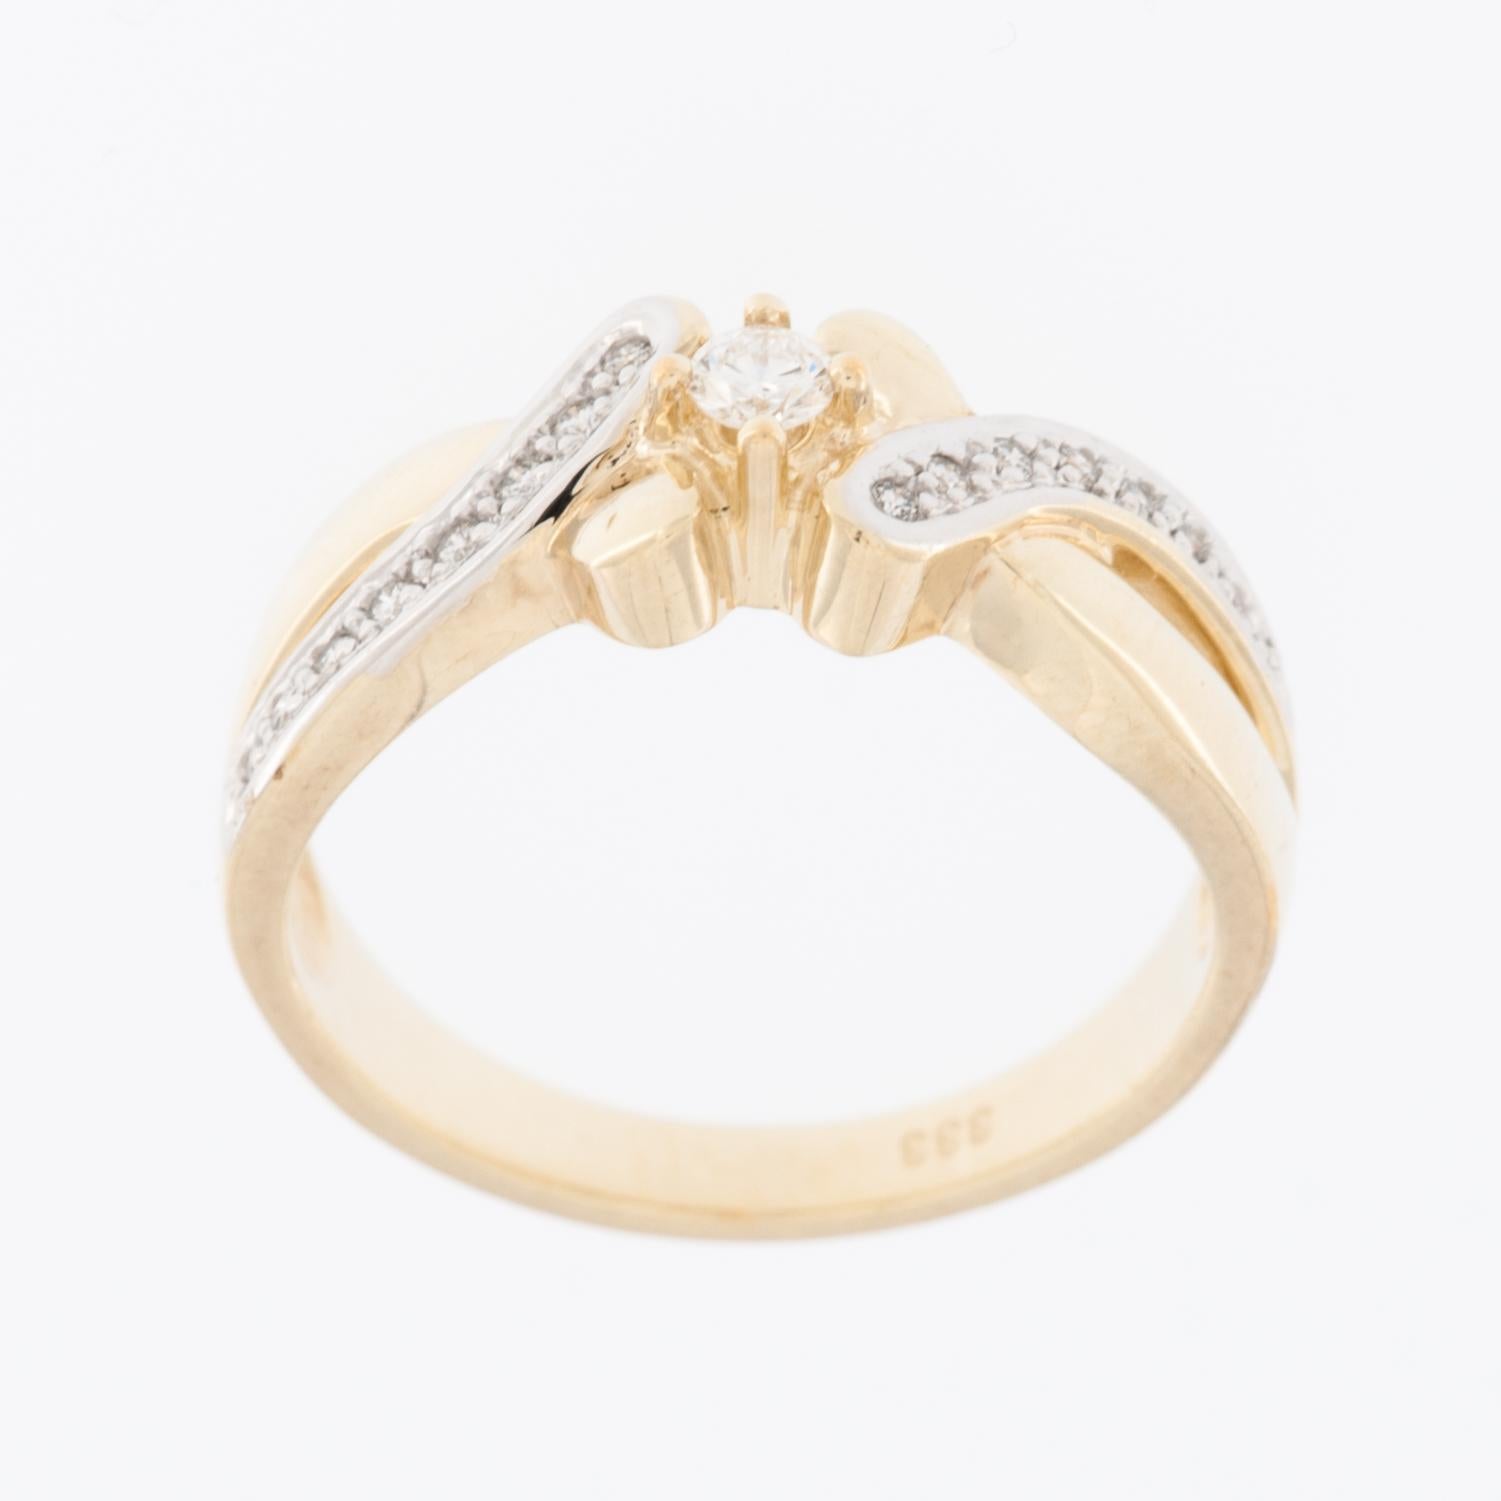 This engagement ring crafted in 8 karat gold and adorned with exquisite diamonds is a symbol of timeless elegance and commitment. The band, made from lustrous 8 karat gold, adds a warm and rich hue to the piece, providing a classic and enduring